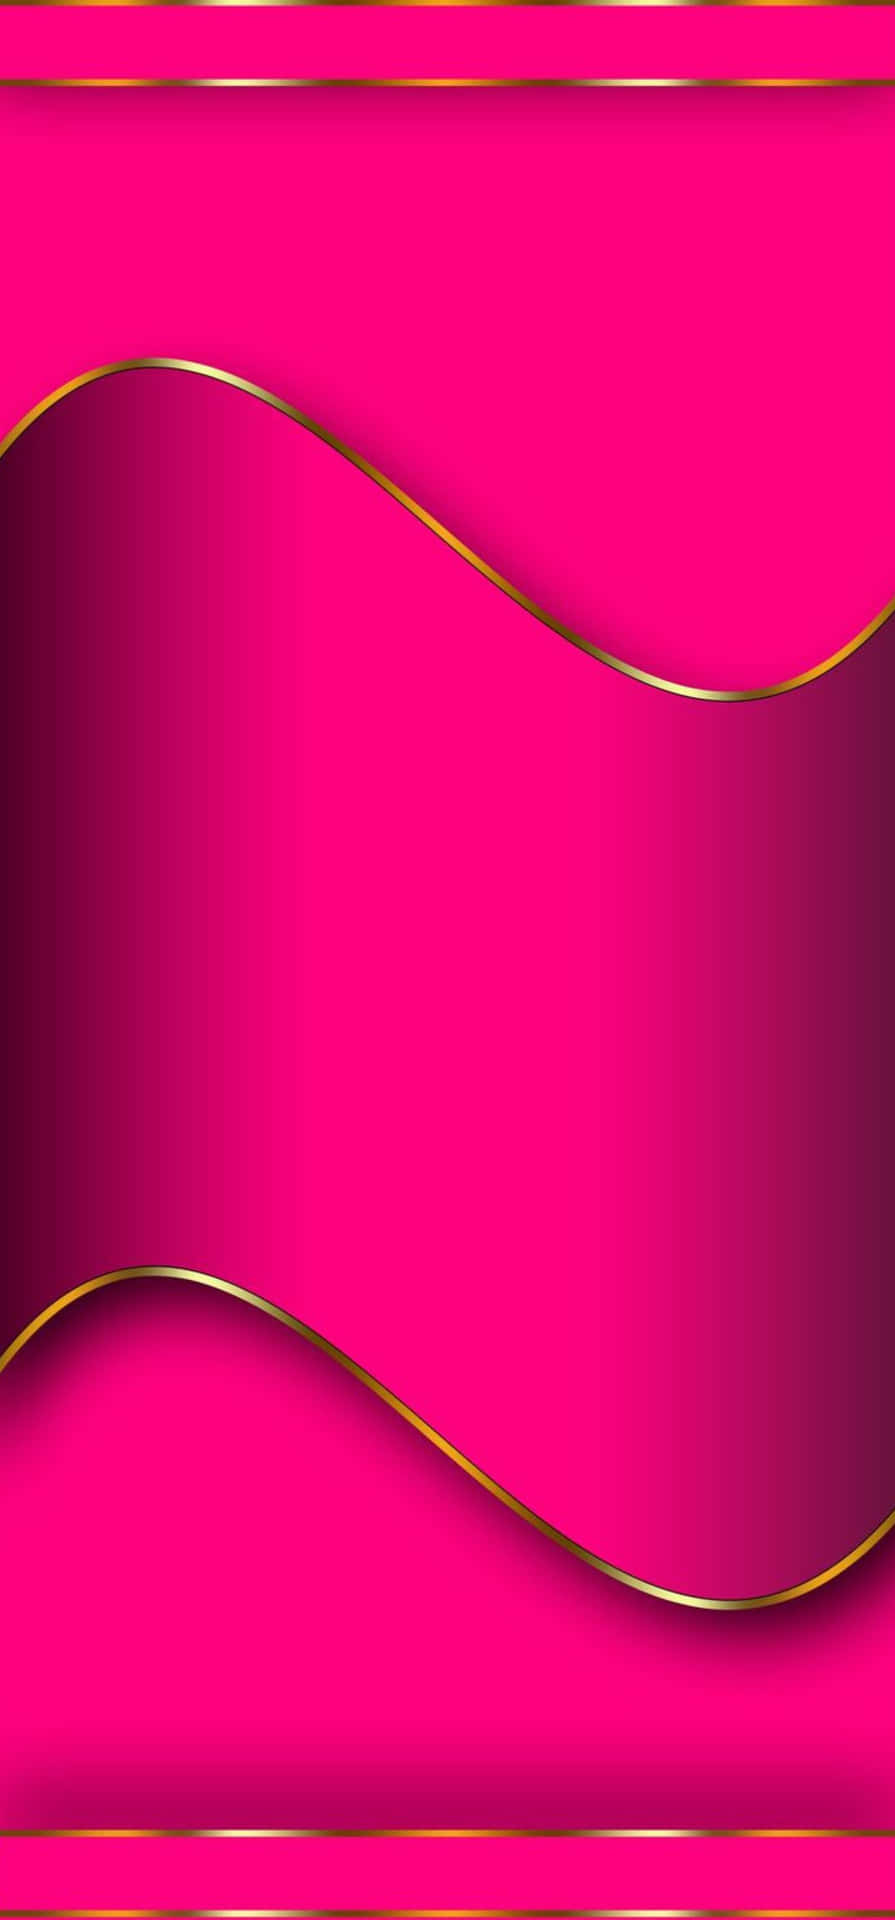 Abstract Pinkand Gold Waves Background Wallpaper